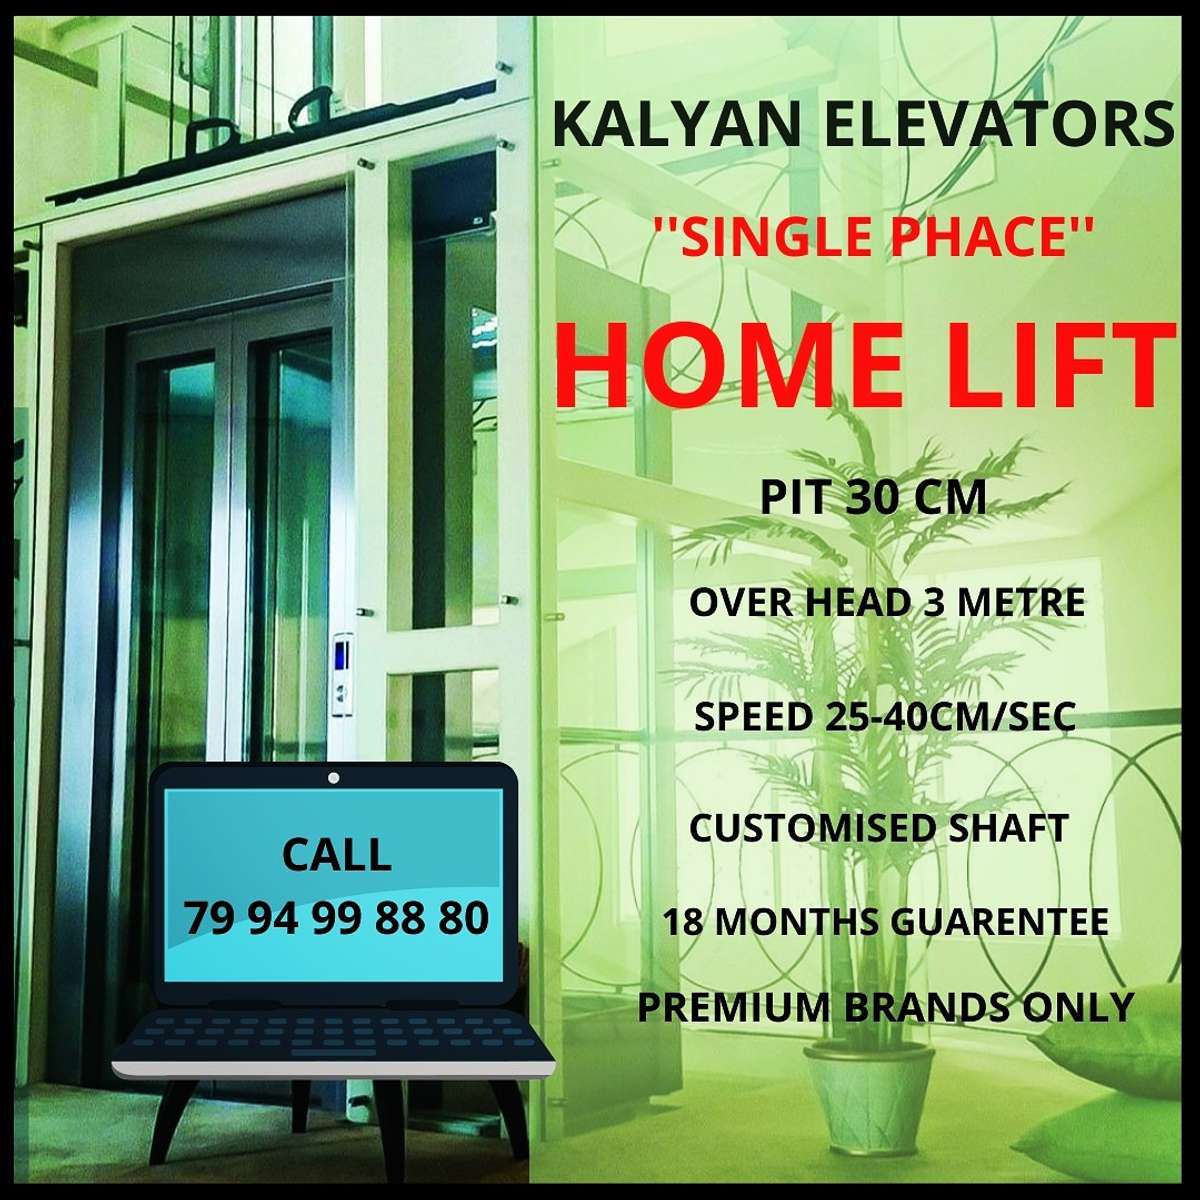 Kalyan Home Elevators offers the long-awaited solution to vertical mobility within homes at affordable prices and easy-to-use features. Our customized and aesthetically designed home lifts are easily installable in pre existing homes as well as houses under construction, and help you relieve the headache of climbing. More details:-